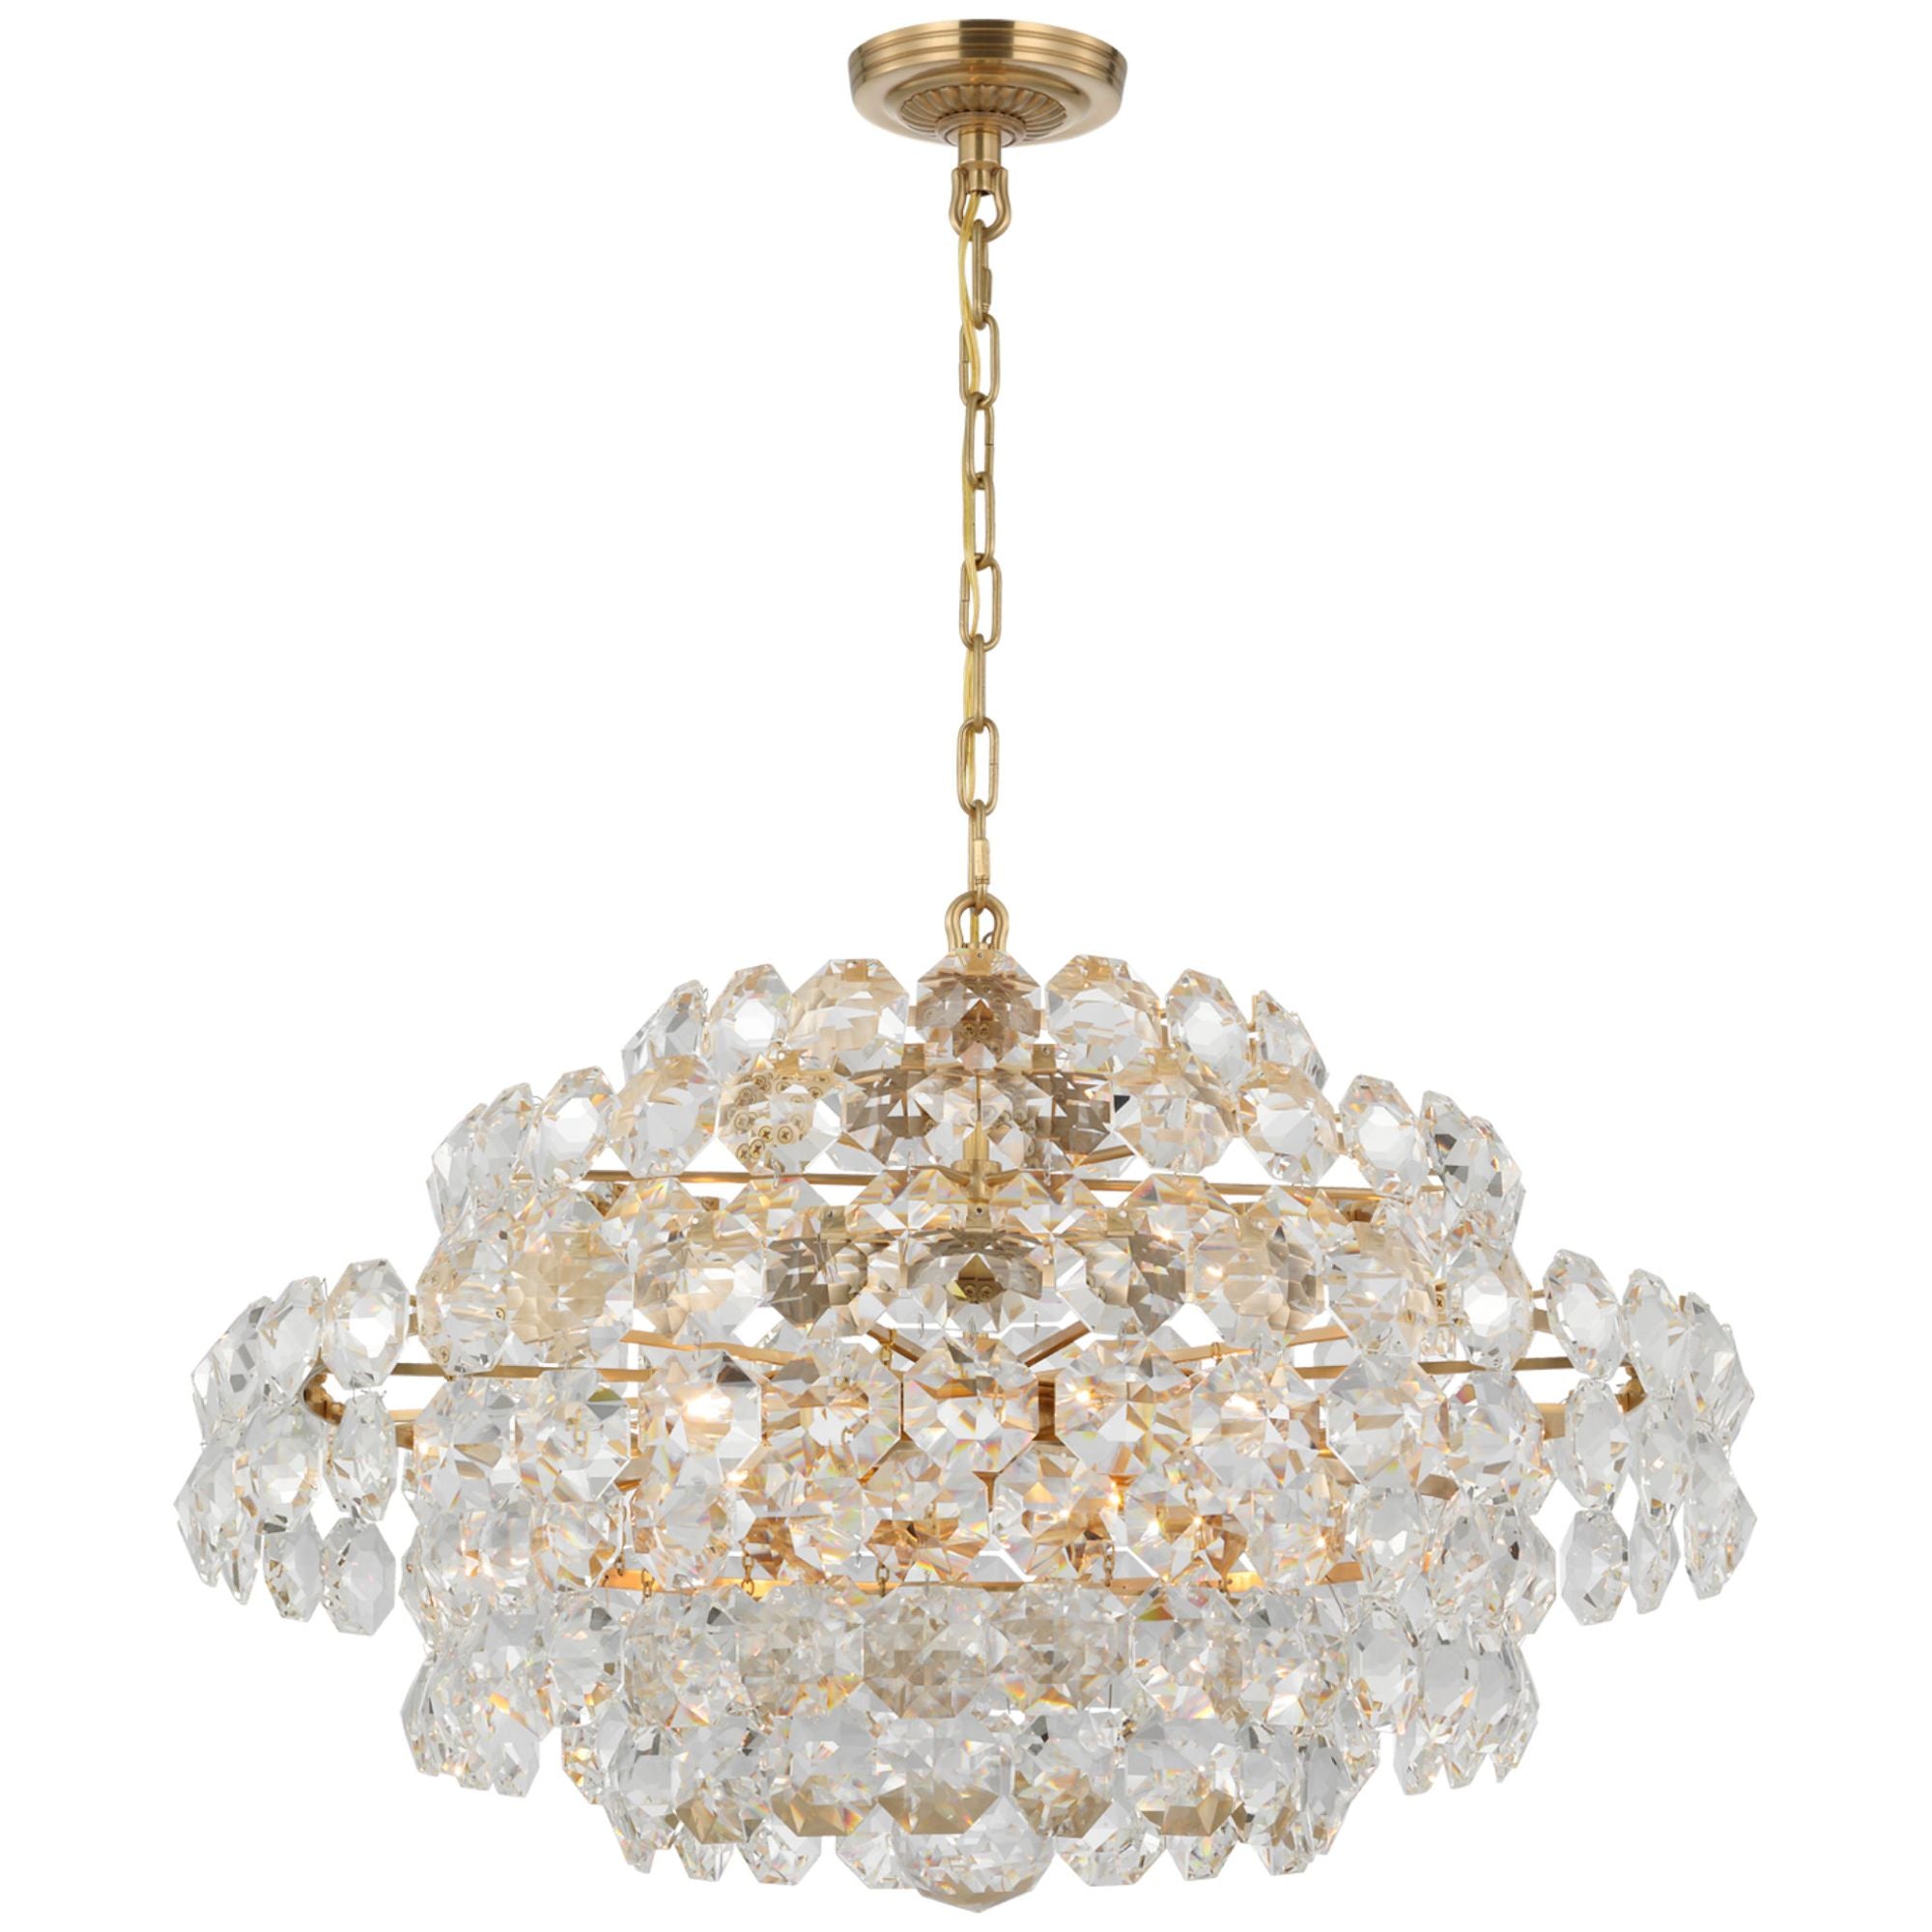 AERIN Sanger Small Chandelier in Hand-Rubbed Antique Brass with Crystal